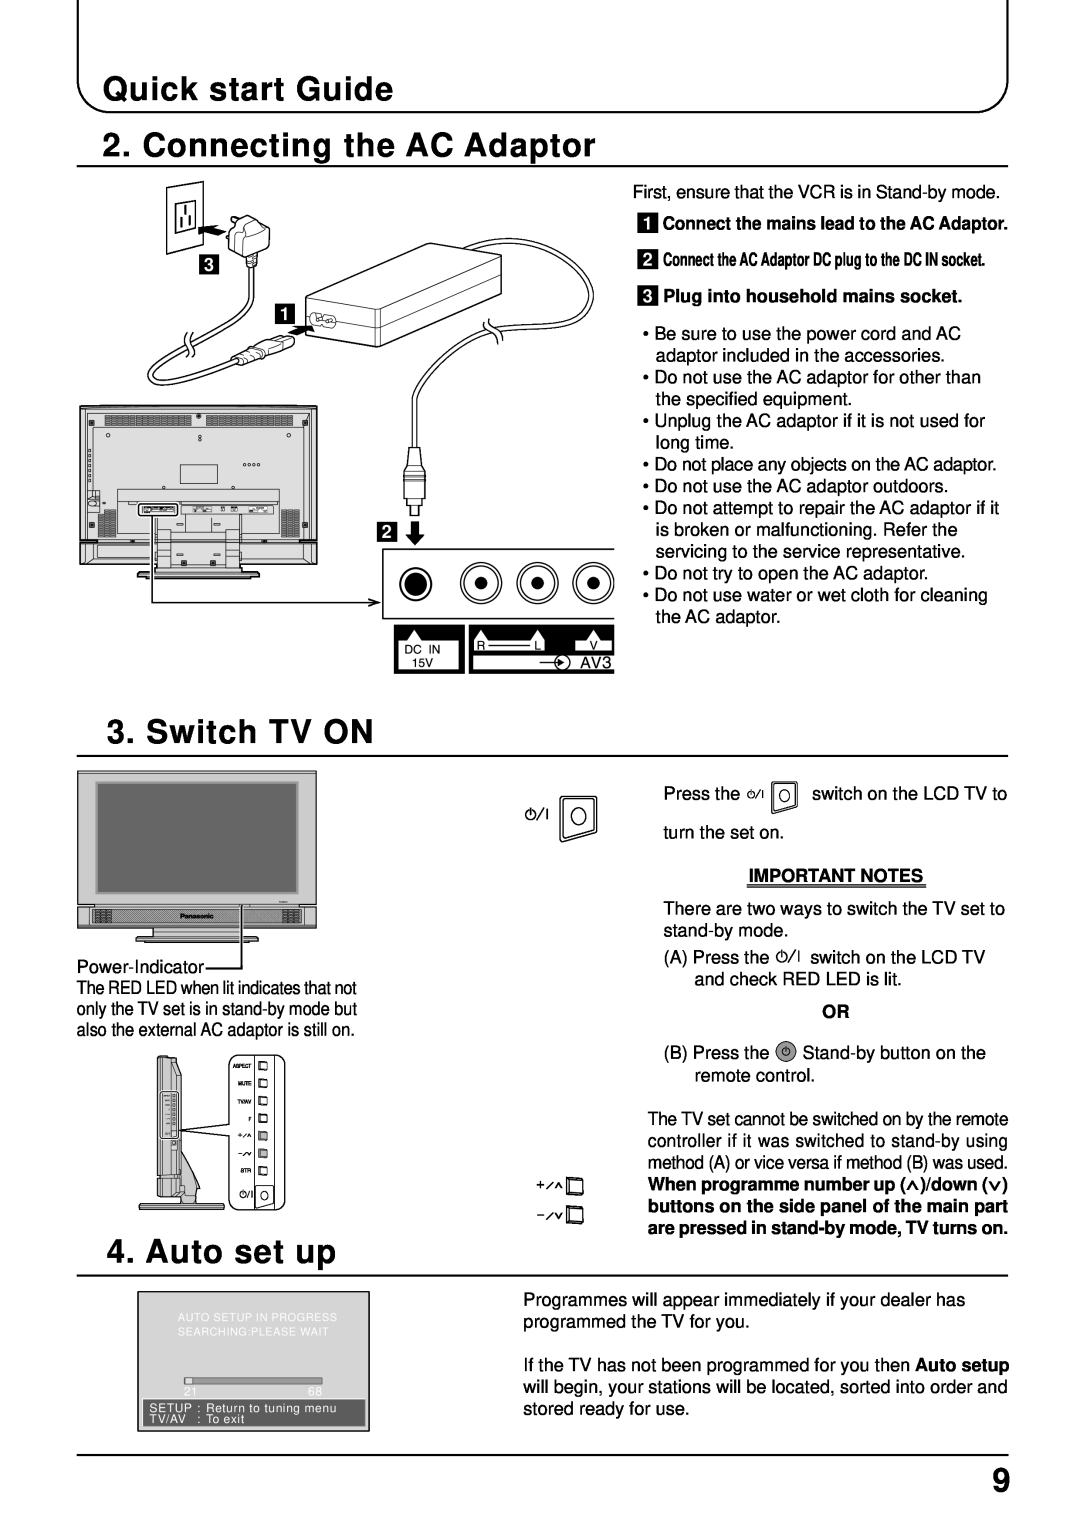 Panasonic TX-22LT2 manual Quick start Guide 2. Connecting the AC Adaptor, Switch TV ON, Auto set up, Important Notes 